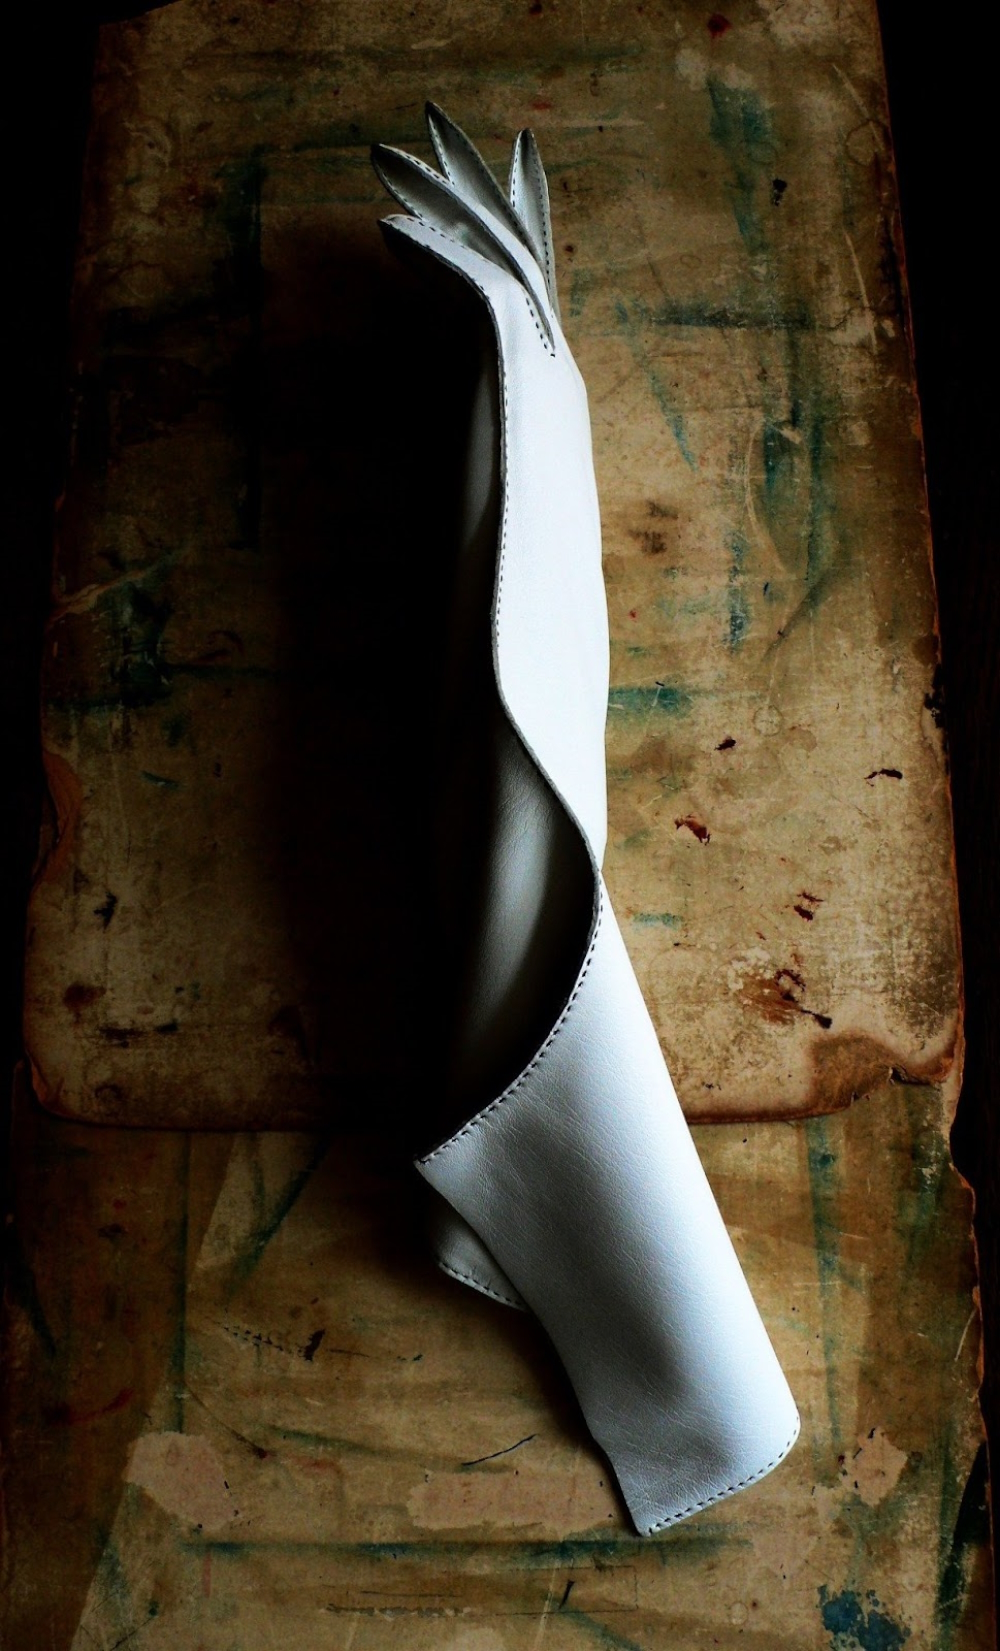 'On The Curve' (Sculptural glove, lambskin leather).